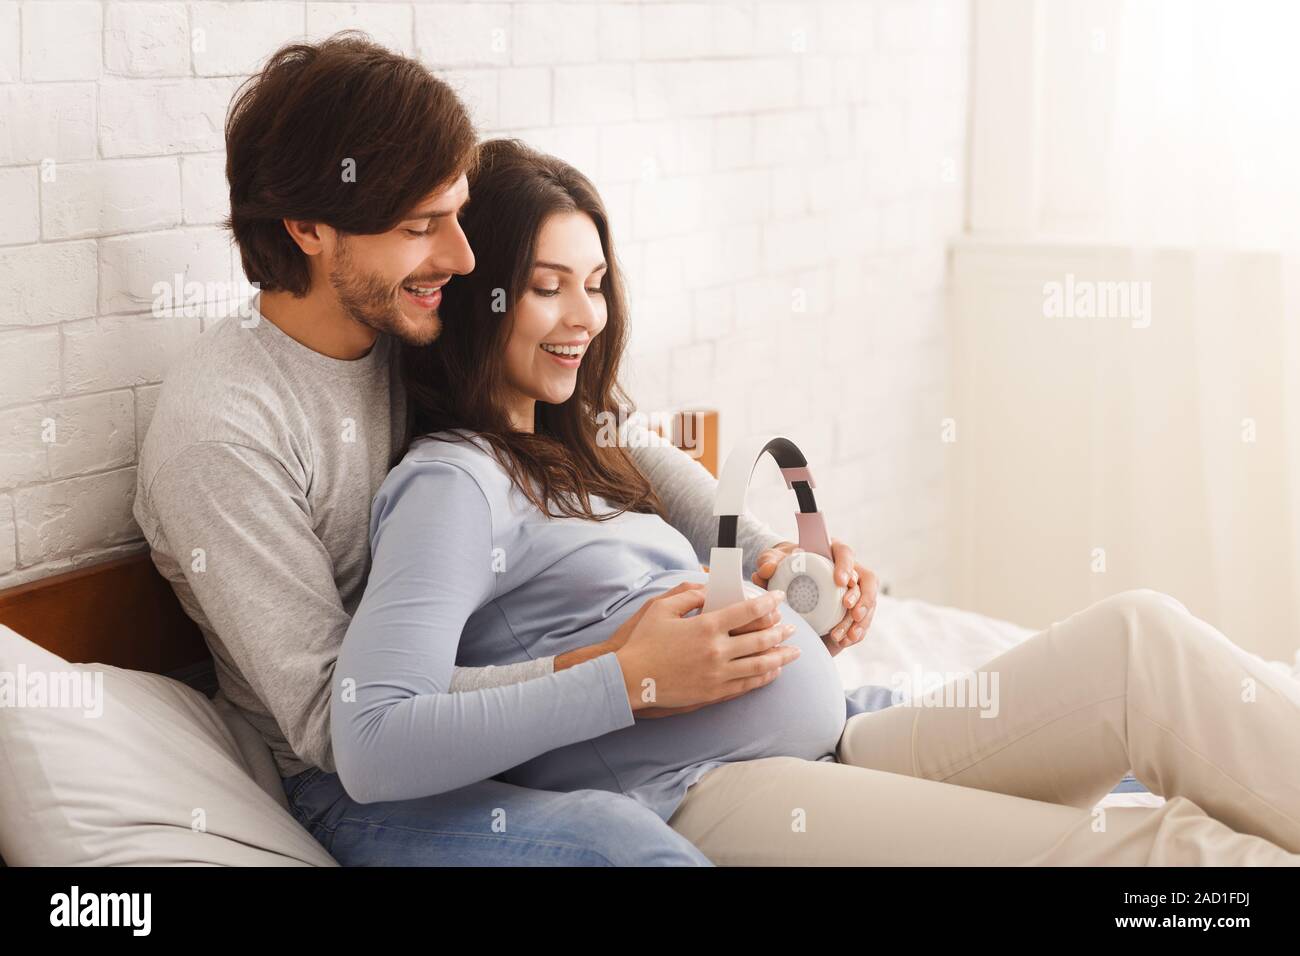 Pregnant woman with headphones on belly, Stock Photo, Picture And Royalty  Free Image. Pic. WR0252878